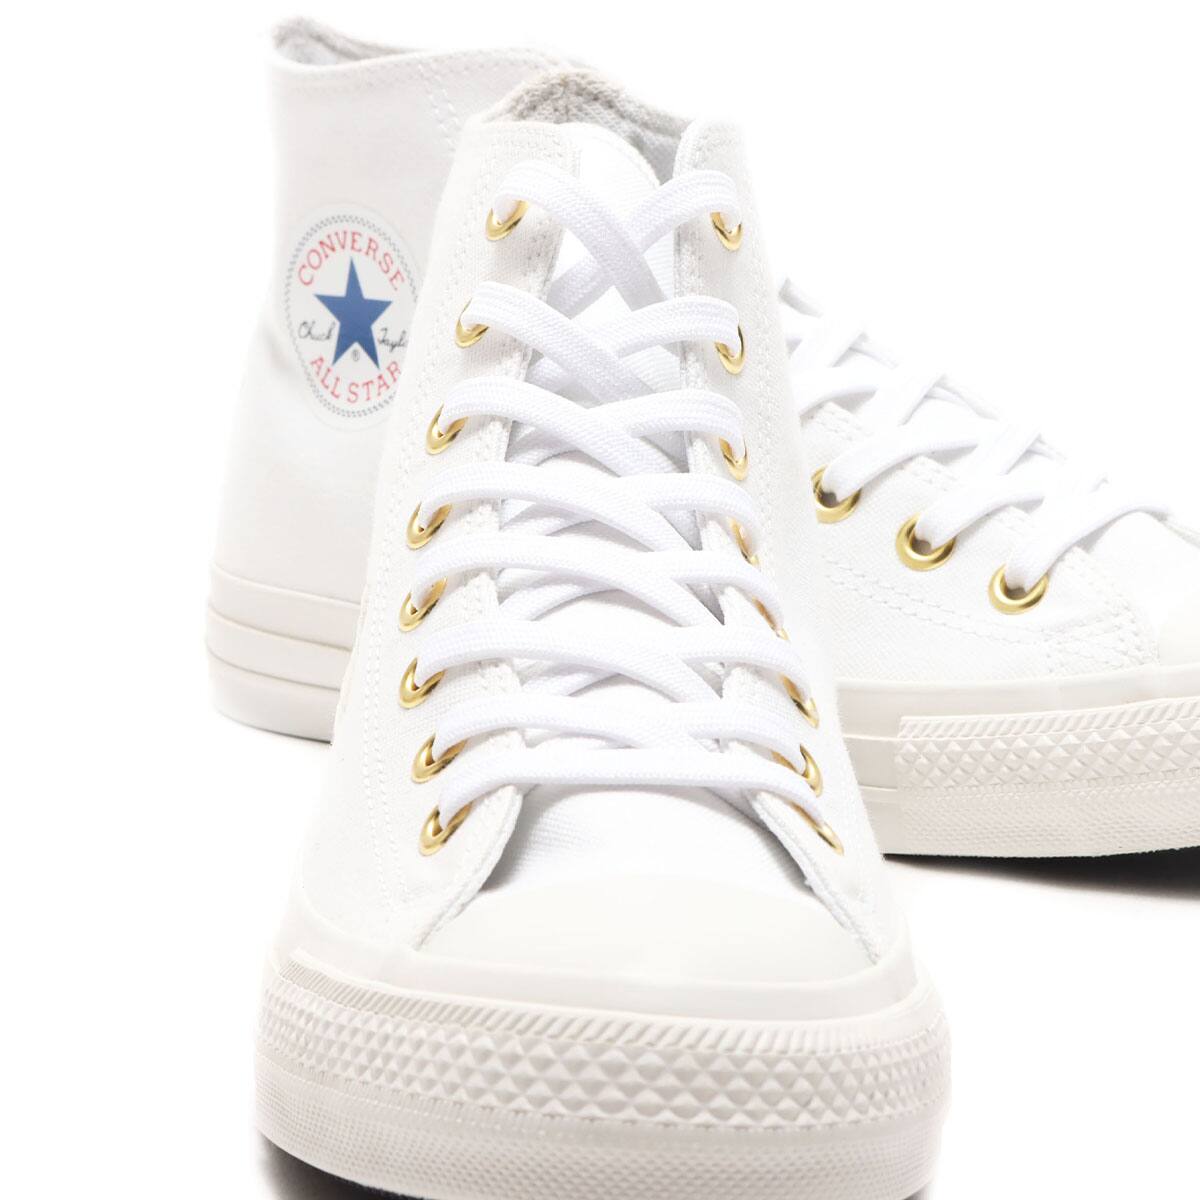 CONVERSE ALL STAR 100 LOGOEMBROIDERY G HI WHITE 20FW-I